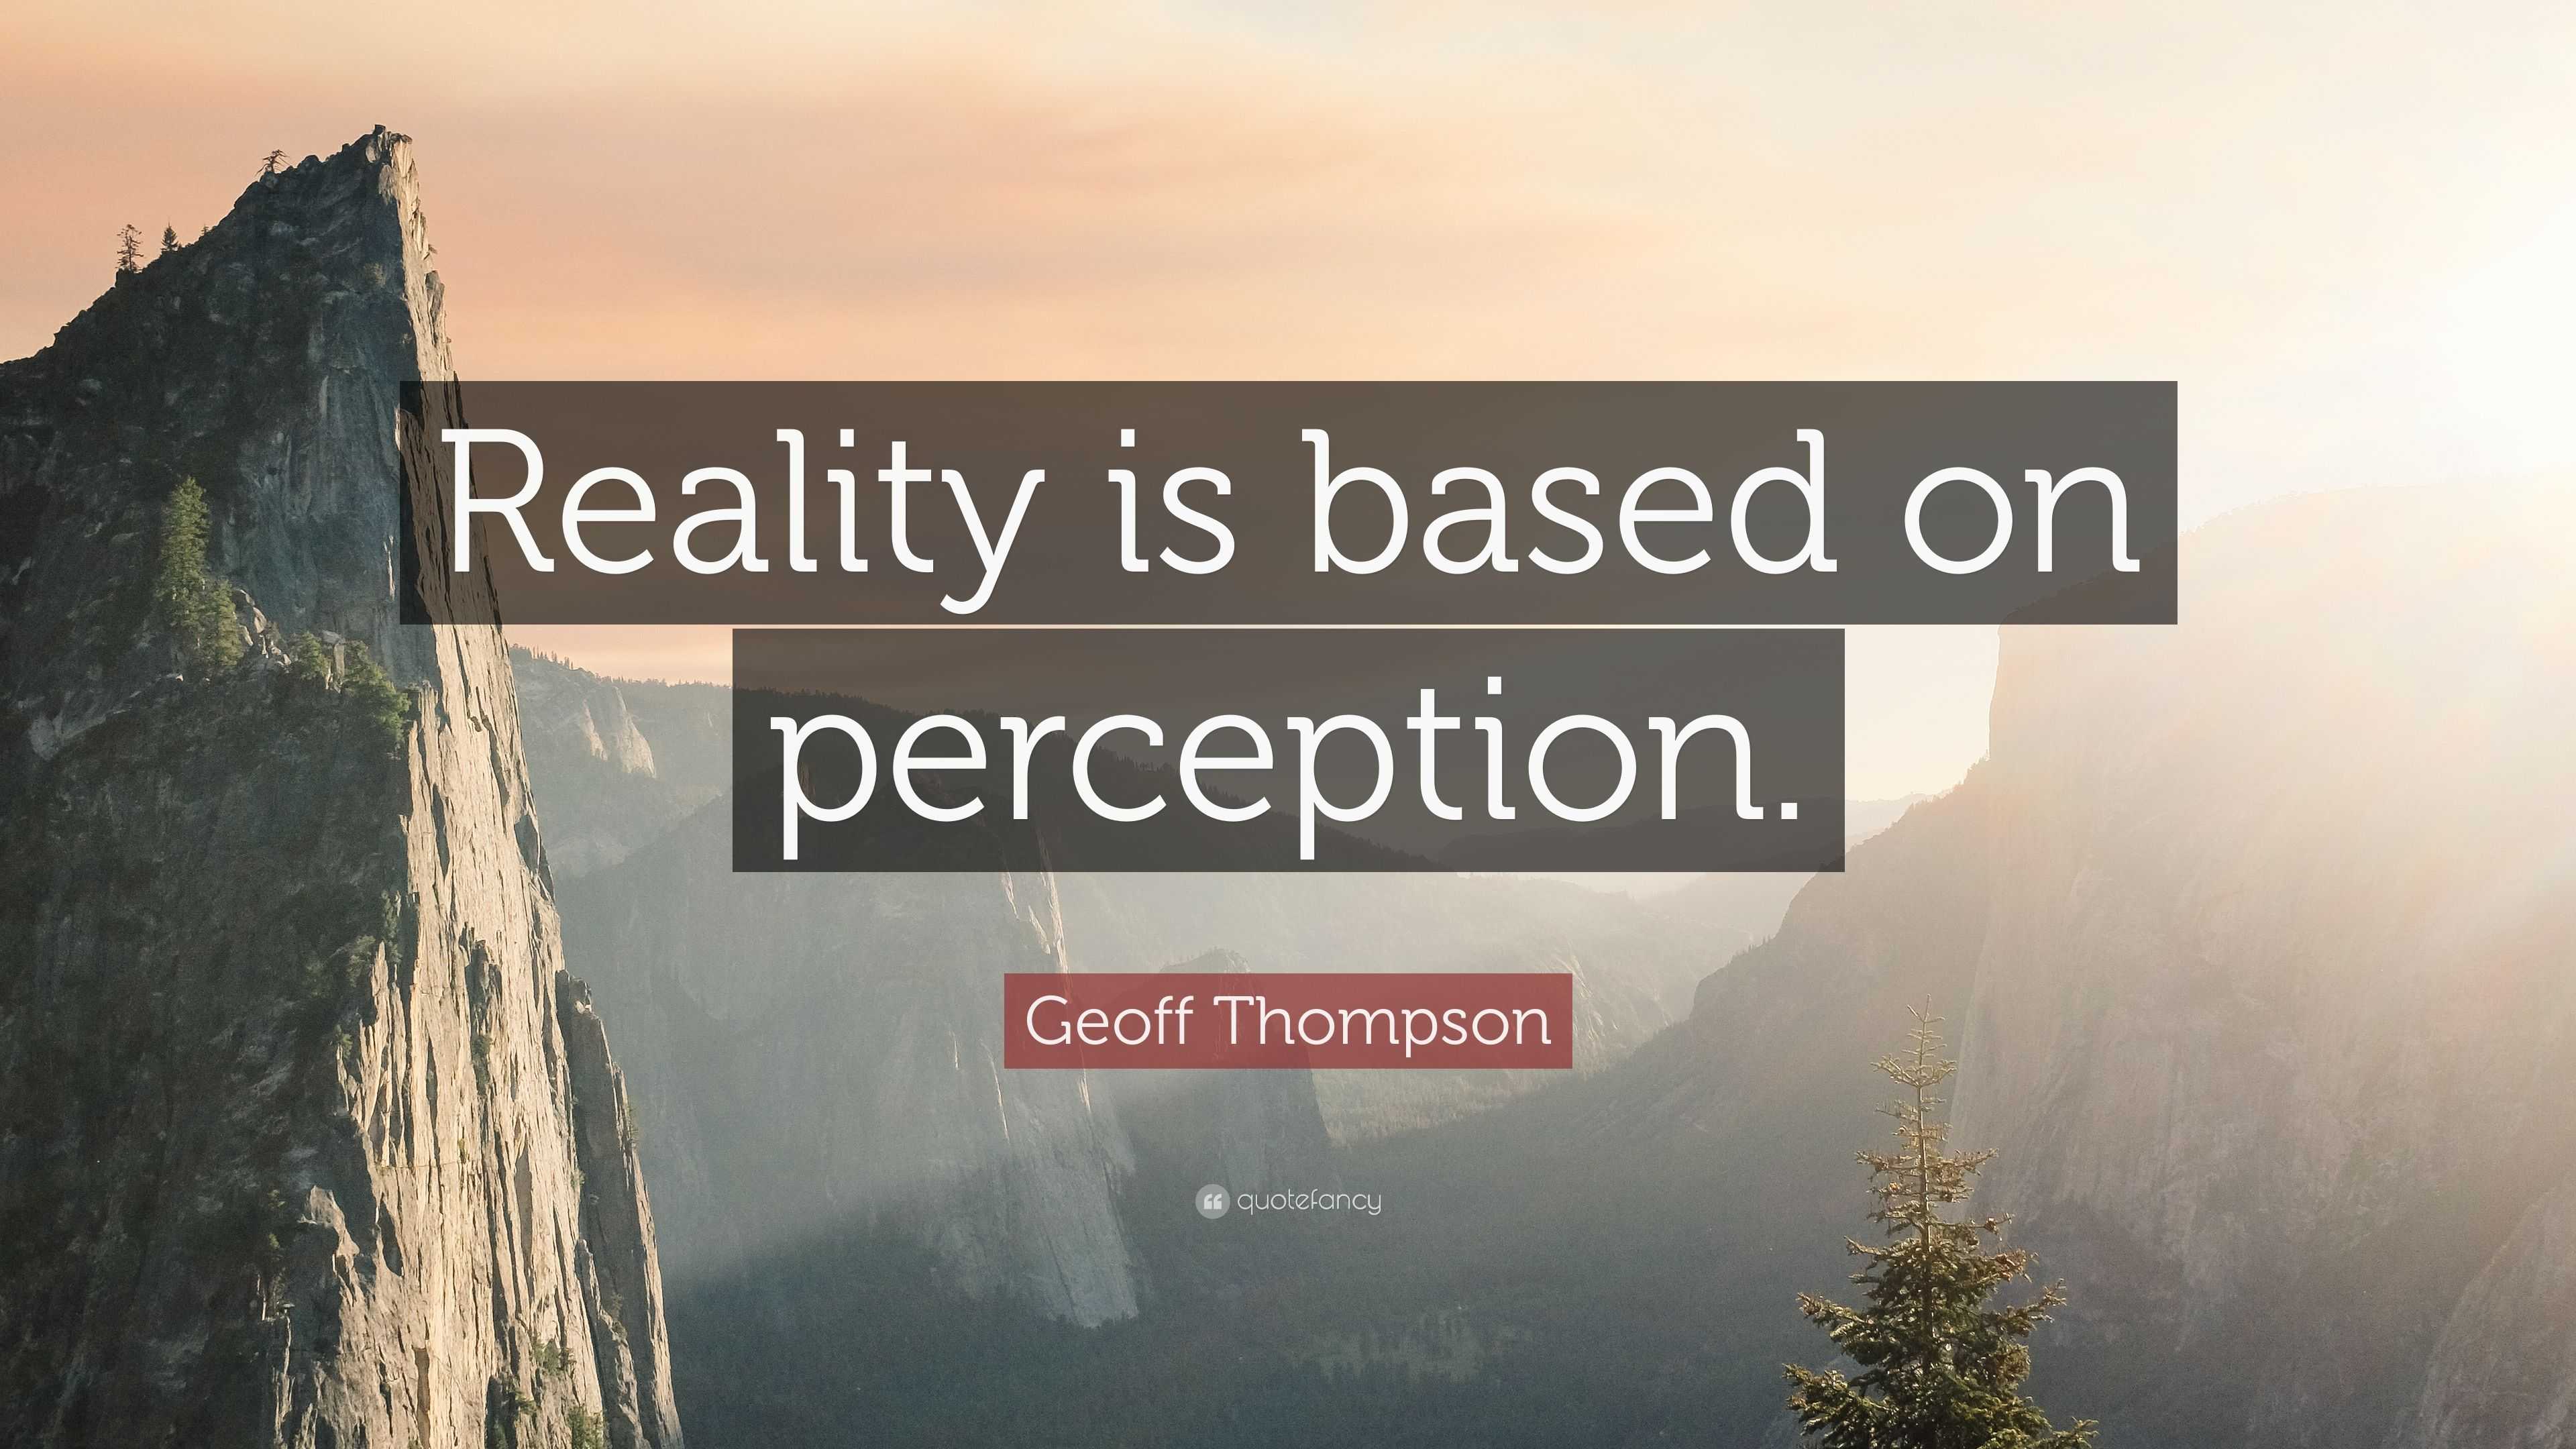 Geoff Thompson Quote: “Reality is based on perception.”